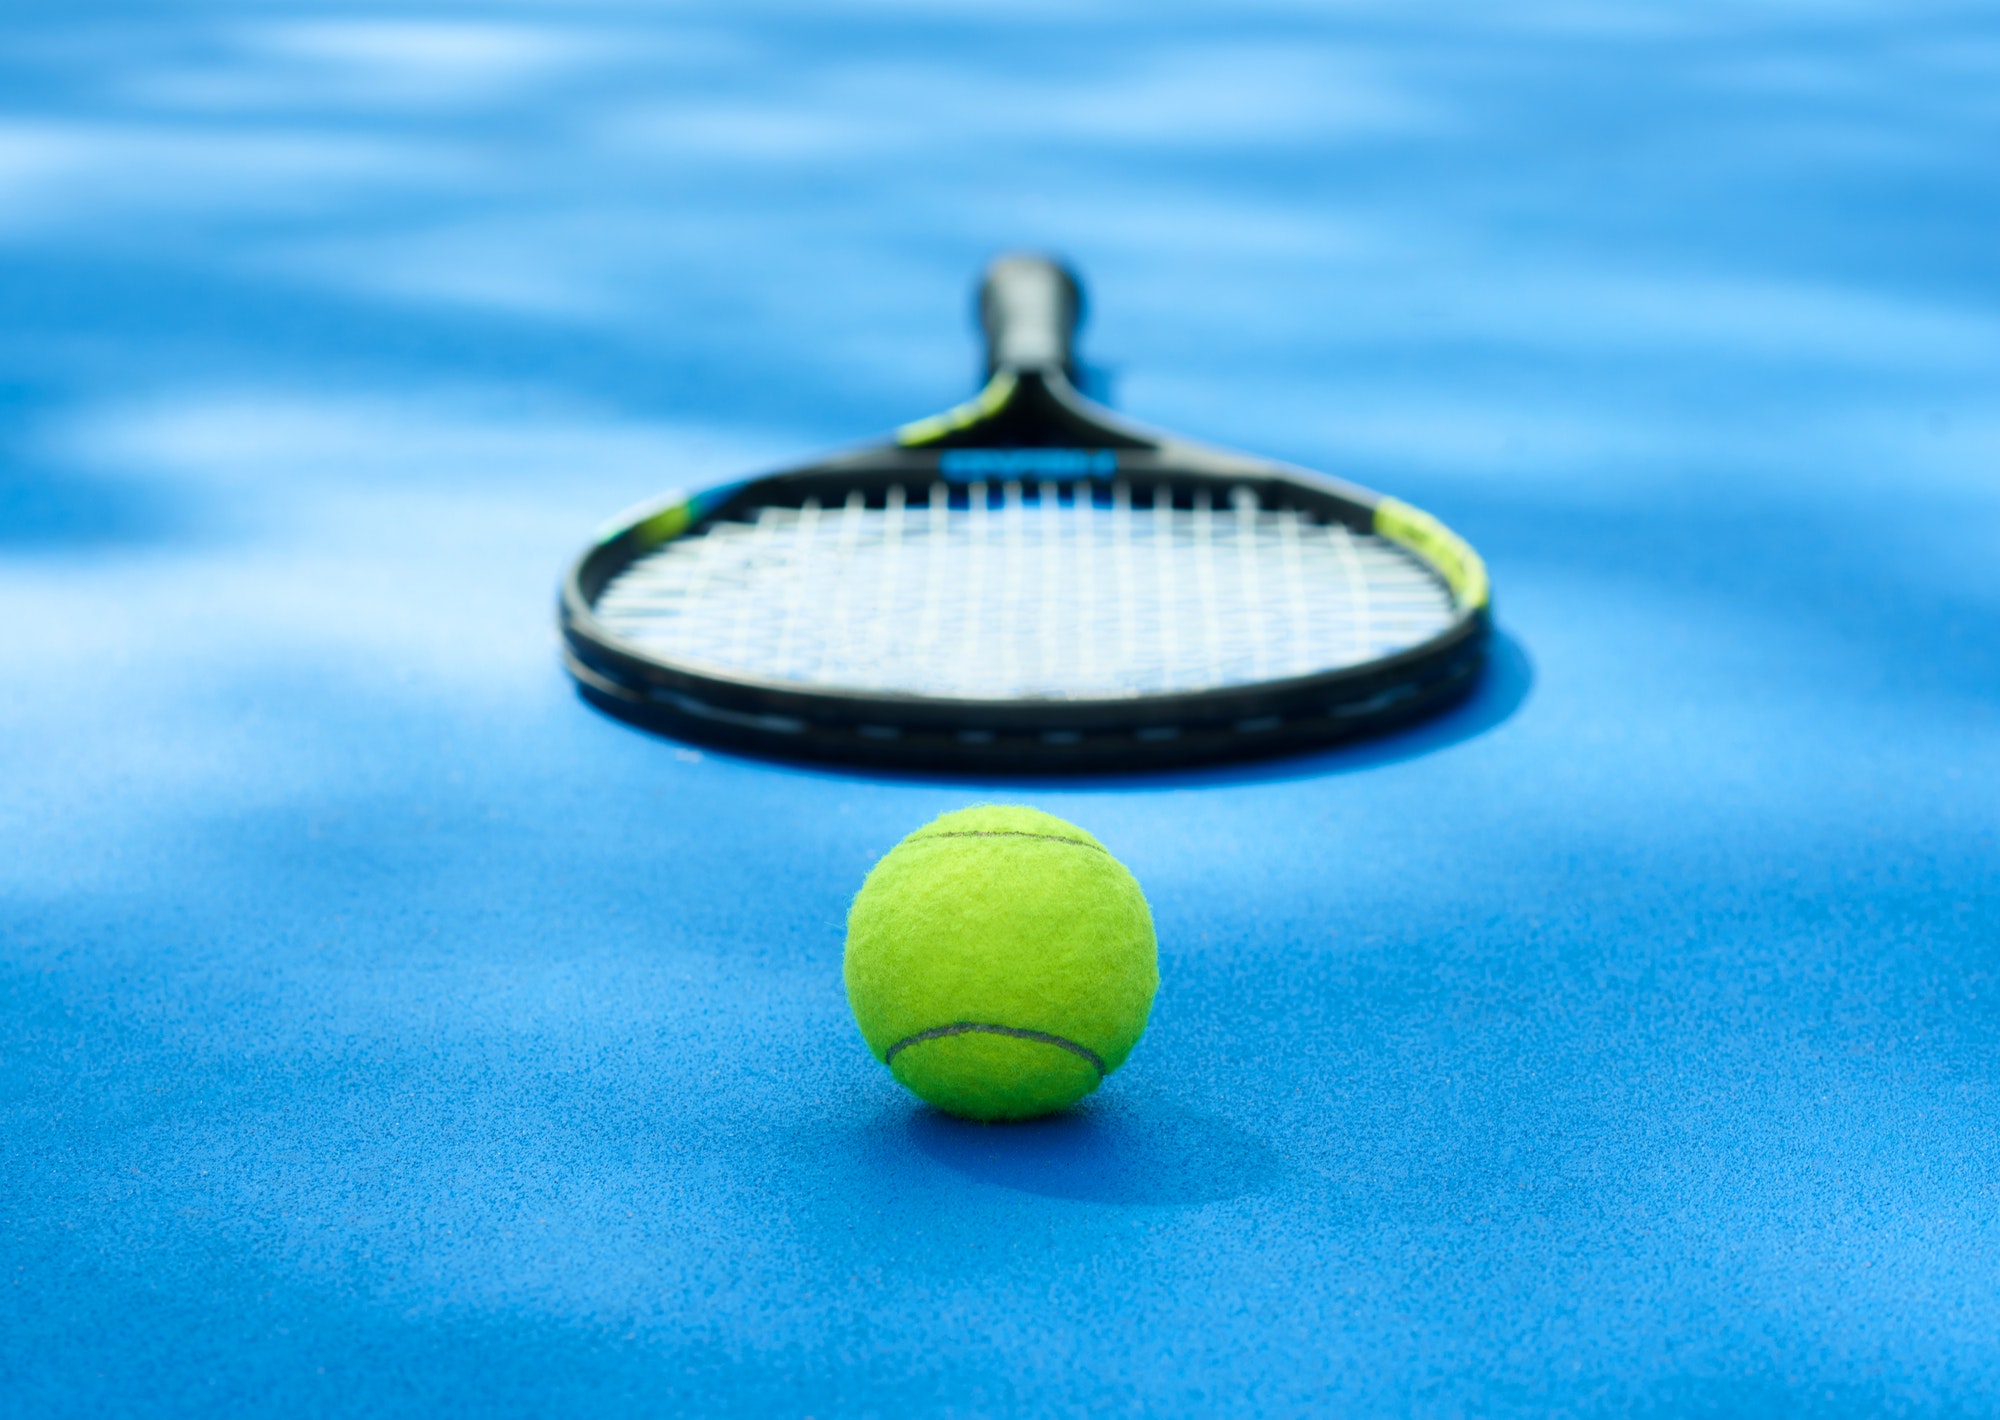 Tennis ball is laying near racket on blue cort carpet